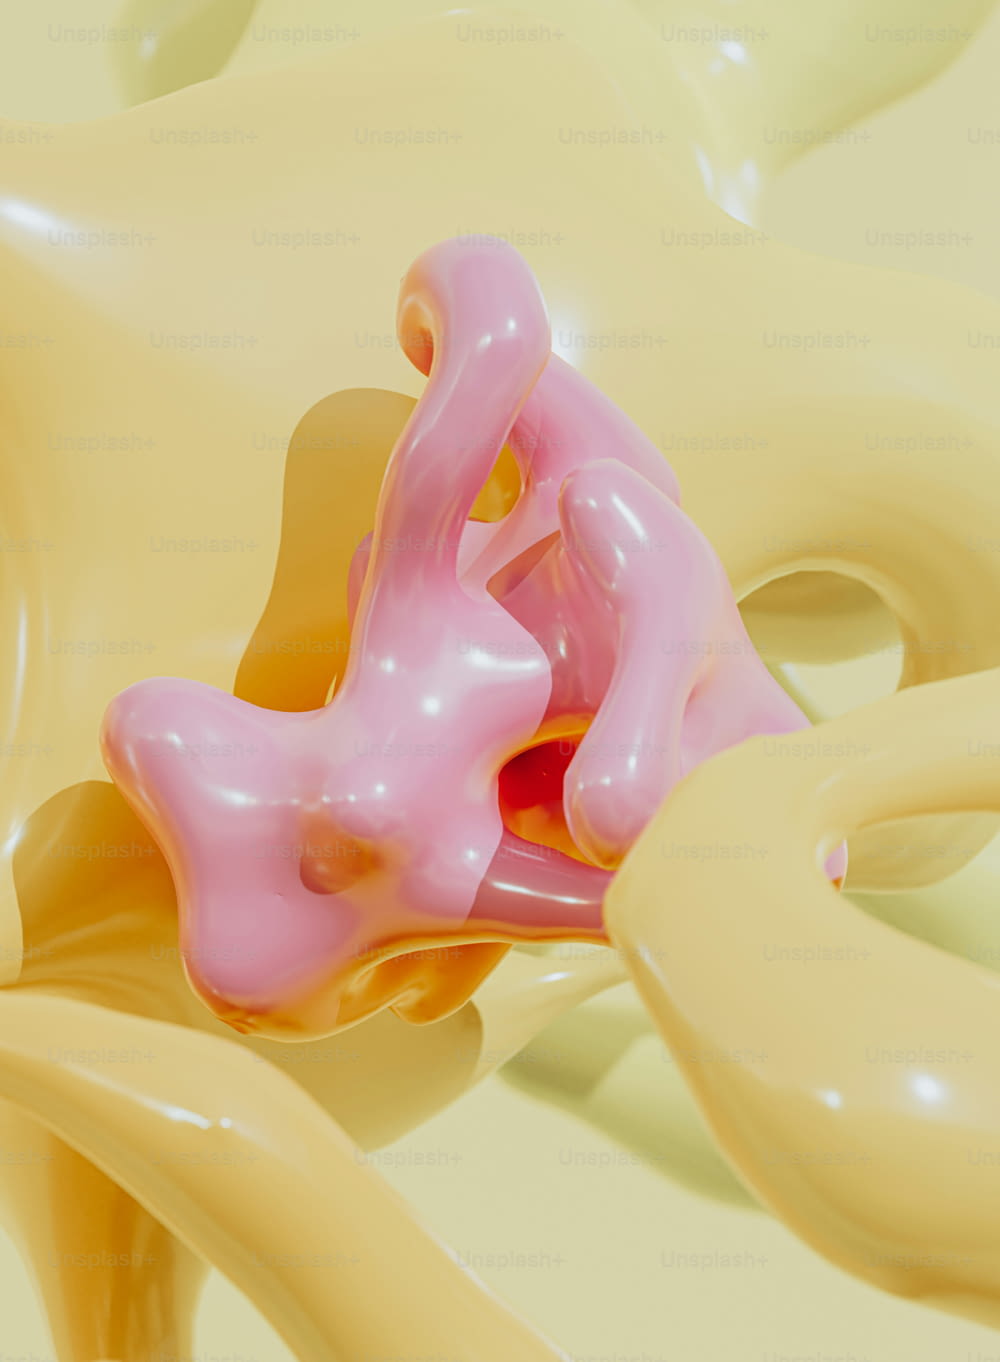 a 3d image of a pink and yellow object